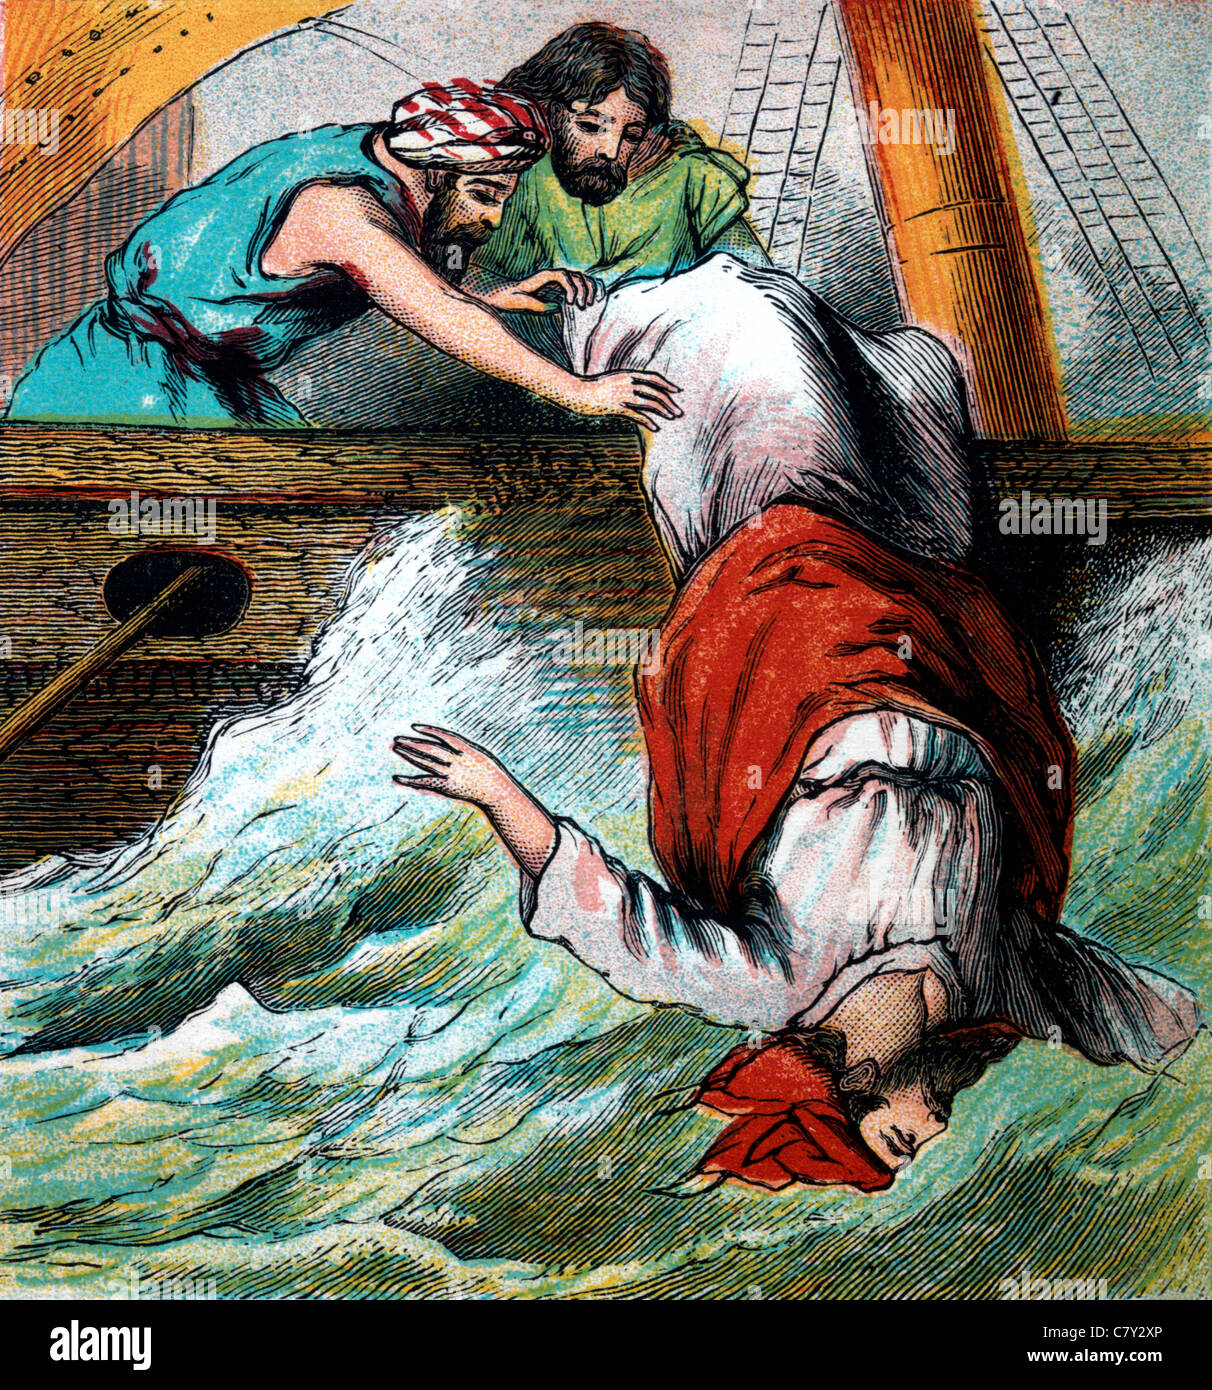 illustration-from-the-story-of-jonah-and-the-whale-jonah-being-cast-into-the-sea-from-old